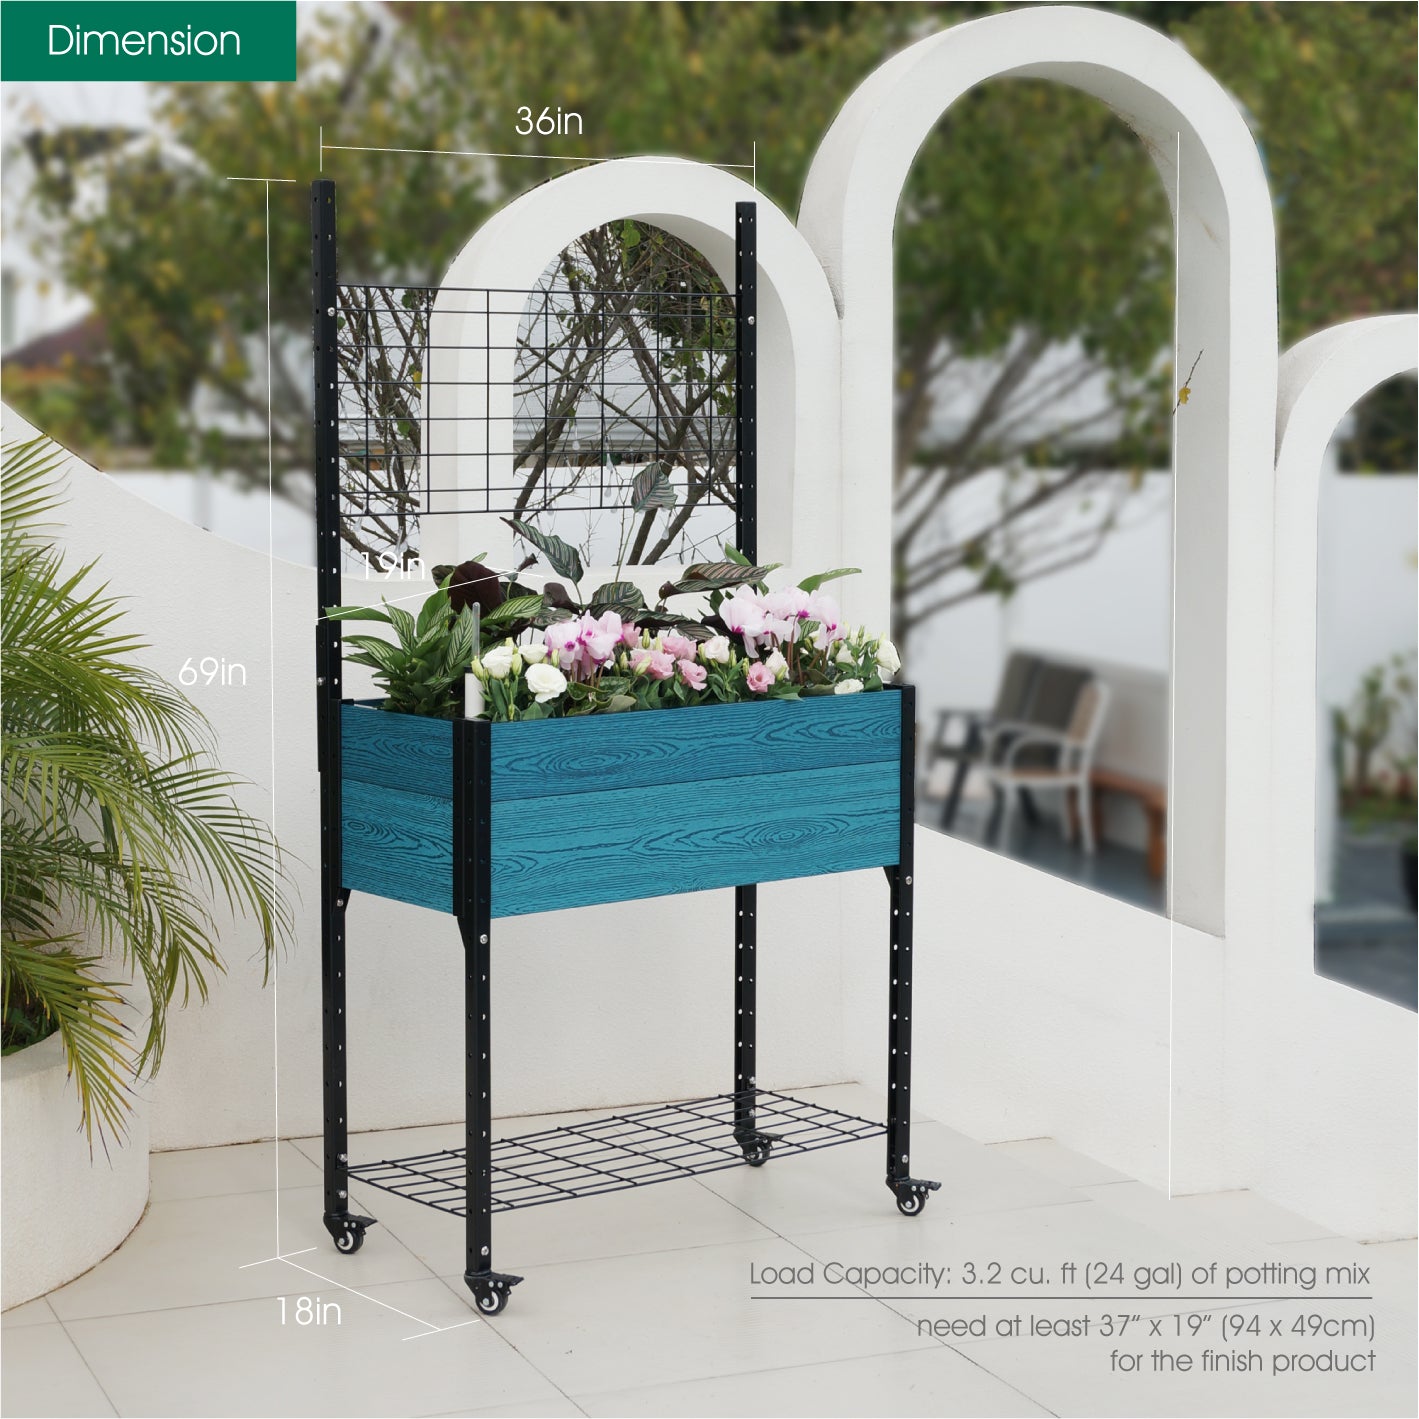 K2301 Self-watering Mobile Elevated Planter in Blue with Trellis